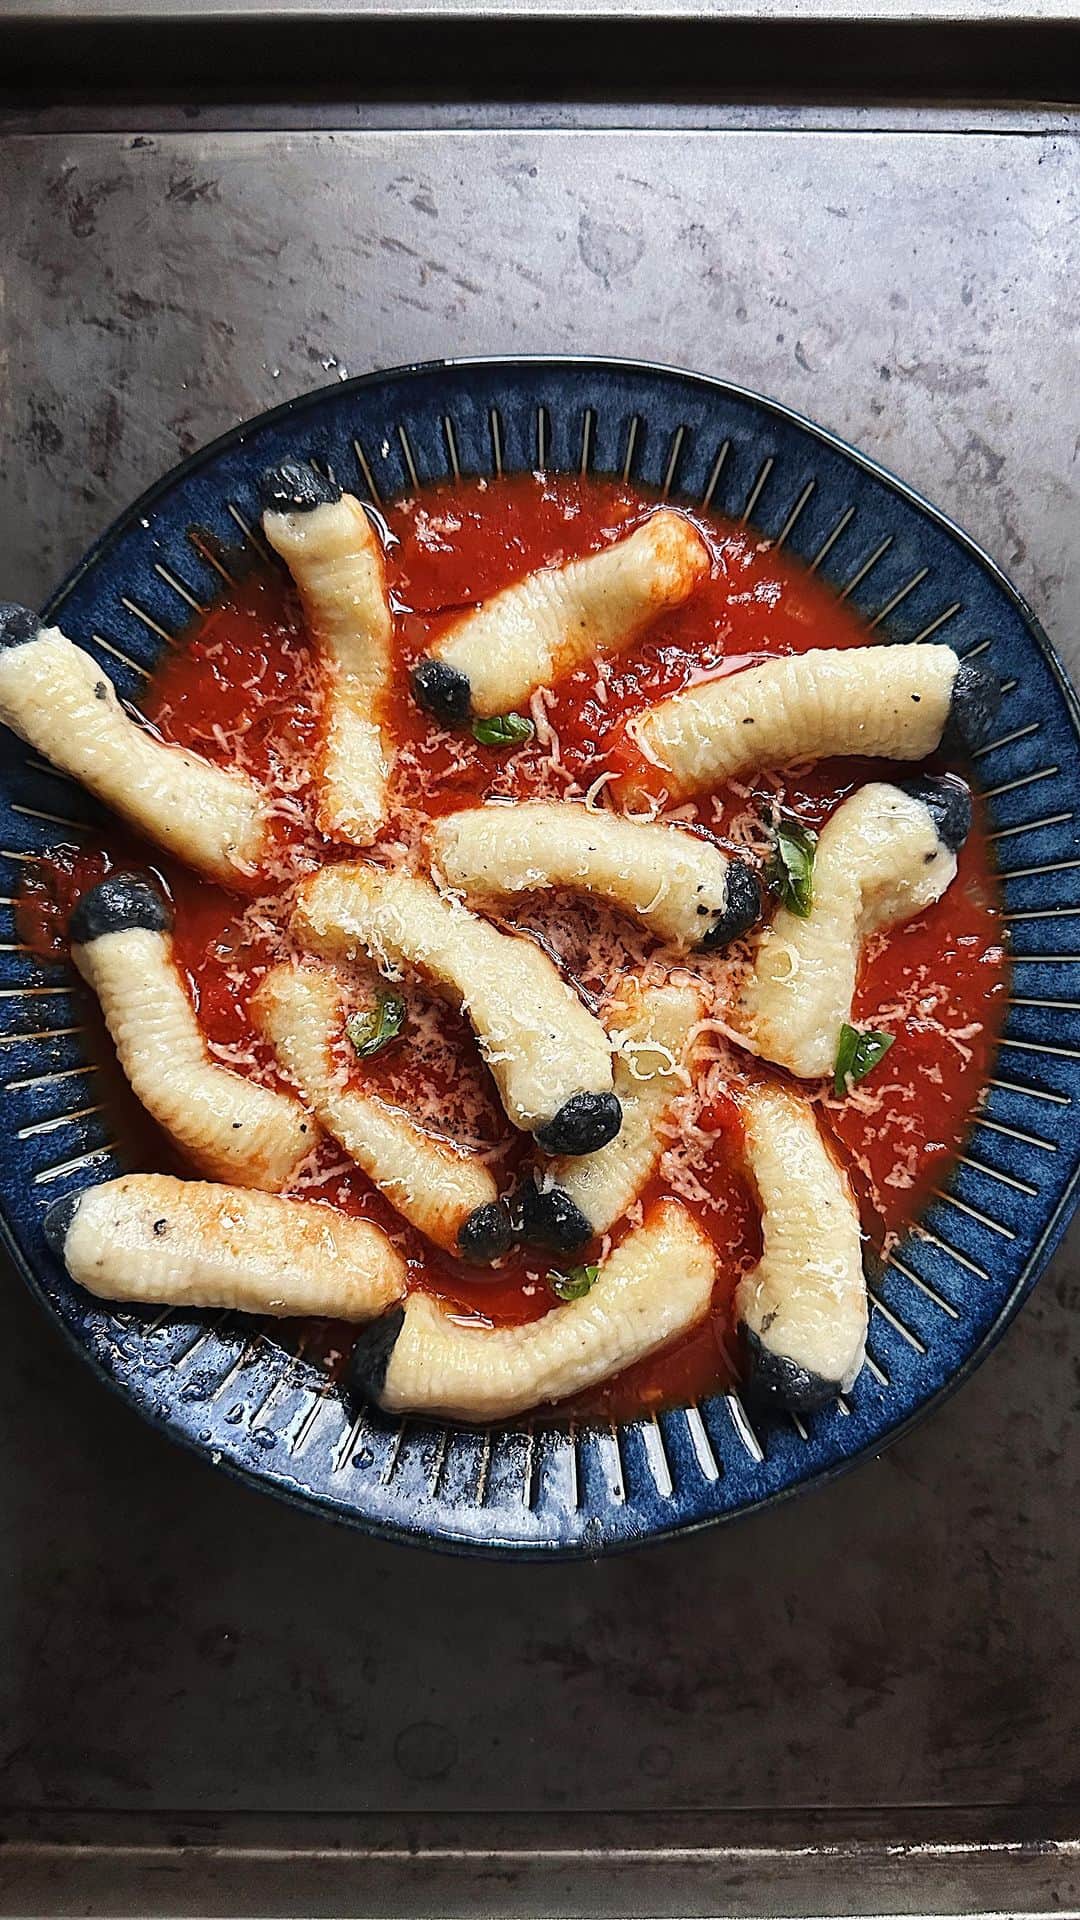 Samantha Leeのインスタグラム：「Putting my spin on Halloween maggot gnocchi, inspired by the creativity of @tastemade ! 👻 #leesamantha #TastemadeInspired #halloween   Recipe: 500g potatoes (about 3 potatoes) 120g 00 flour 1 egg 1 tsp salt, plus more to boil gnocchi 1/2 tsp black pepper  1/4 tsp powdered charcoal   Boil the potatoes in a large pot until tender. Take them out of the pot, allow to cool slightly, and peel off the skin. Next, pass them through a potato ricer. Combine potatoes, egg, flour, salt, and pepper using a scraper or your hands to form a soft dough. Dust the dough with flour while gently folding it—avoid over-kneading or compacting the dough; maintain a light and fluffy consistency. Shape the dough into a log and divide it into equal pieces. Roll each piece into thin strips, then cut those strips into 1-inch pieces. Roll the gnocchi over a floured fork or a gnocchi paddle. Take 1 tbsp of dough and mix it with powdered charcoal to create a black dough. Shape the black dough into small, tiny balls, each about 2mm in size. Position the black dough at the tip of the white gnocchi. To achieve the shape of the maggots. Let the gnocchi rest for 20 minutes before cooking.  In a large pot of salted boiling water, cook the gnocchi. They are ready when they float to the top. Drain and add them into the cooked sauce. Enjoy!」